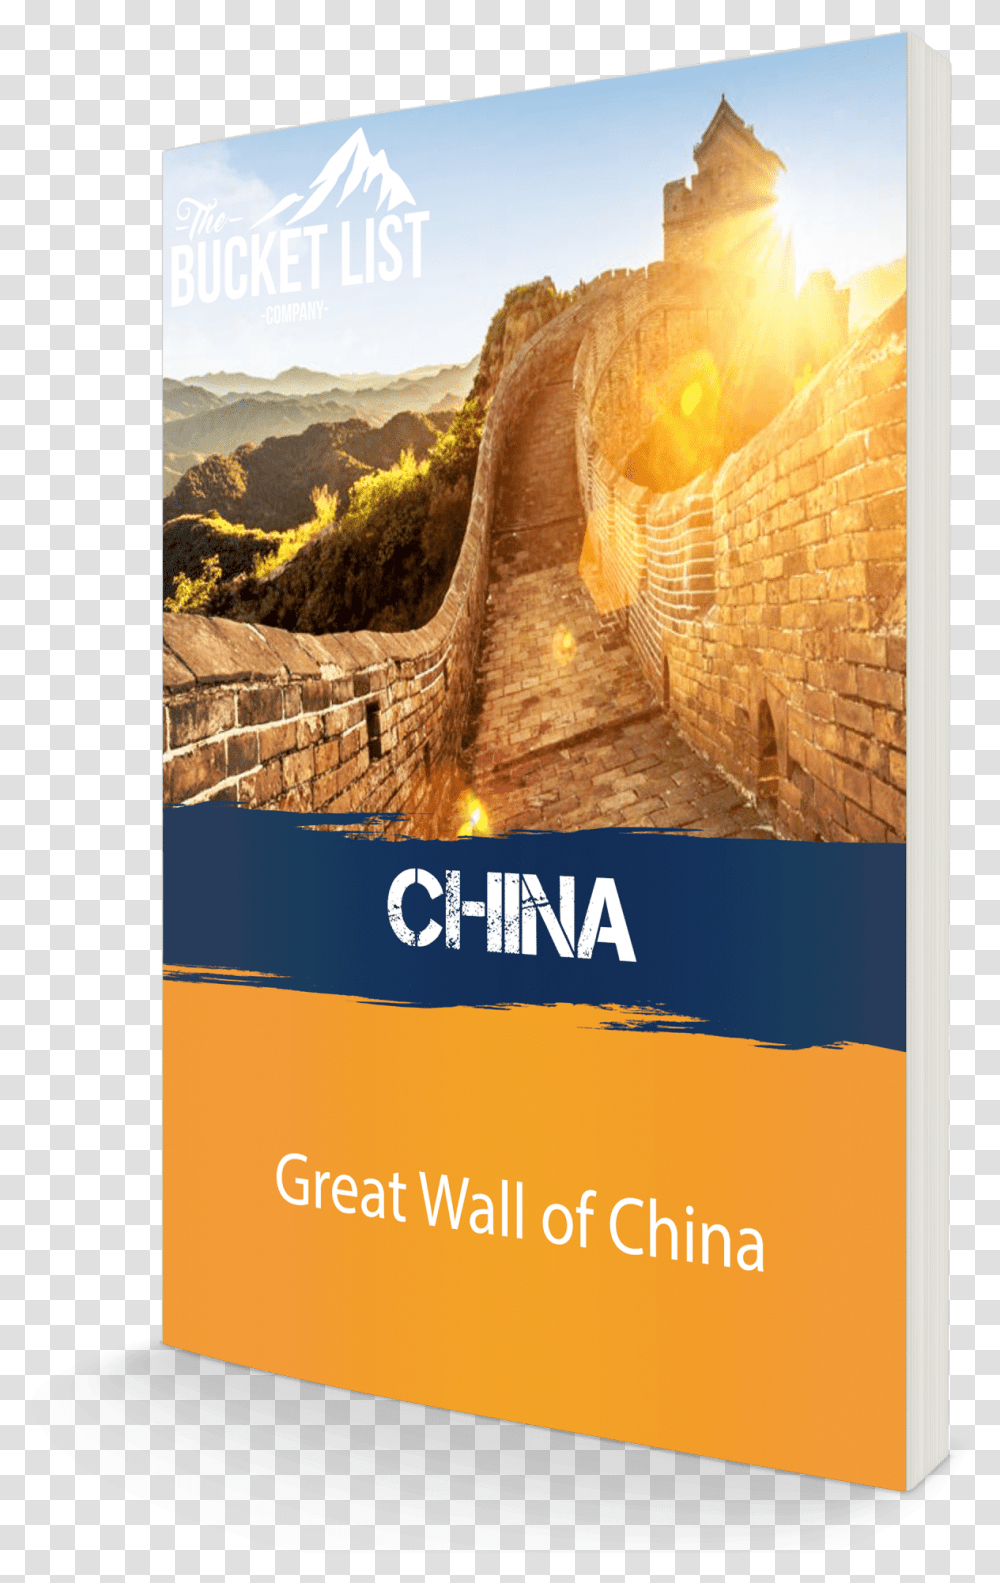 Download Our Guide To The Great Wall Of China Flyer, Poster, Advertisement, Paper, Architecture Transparent Png